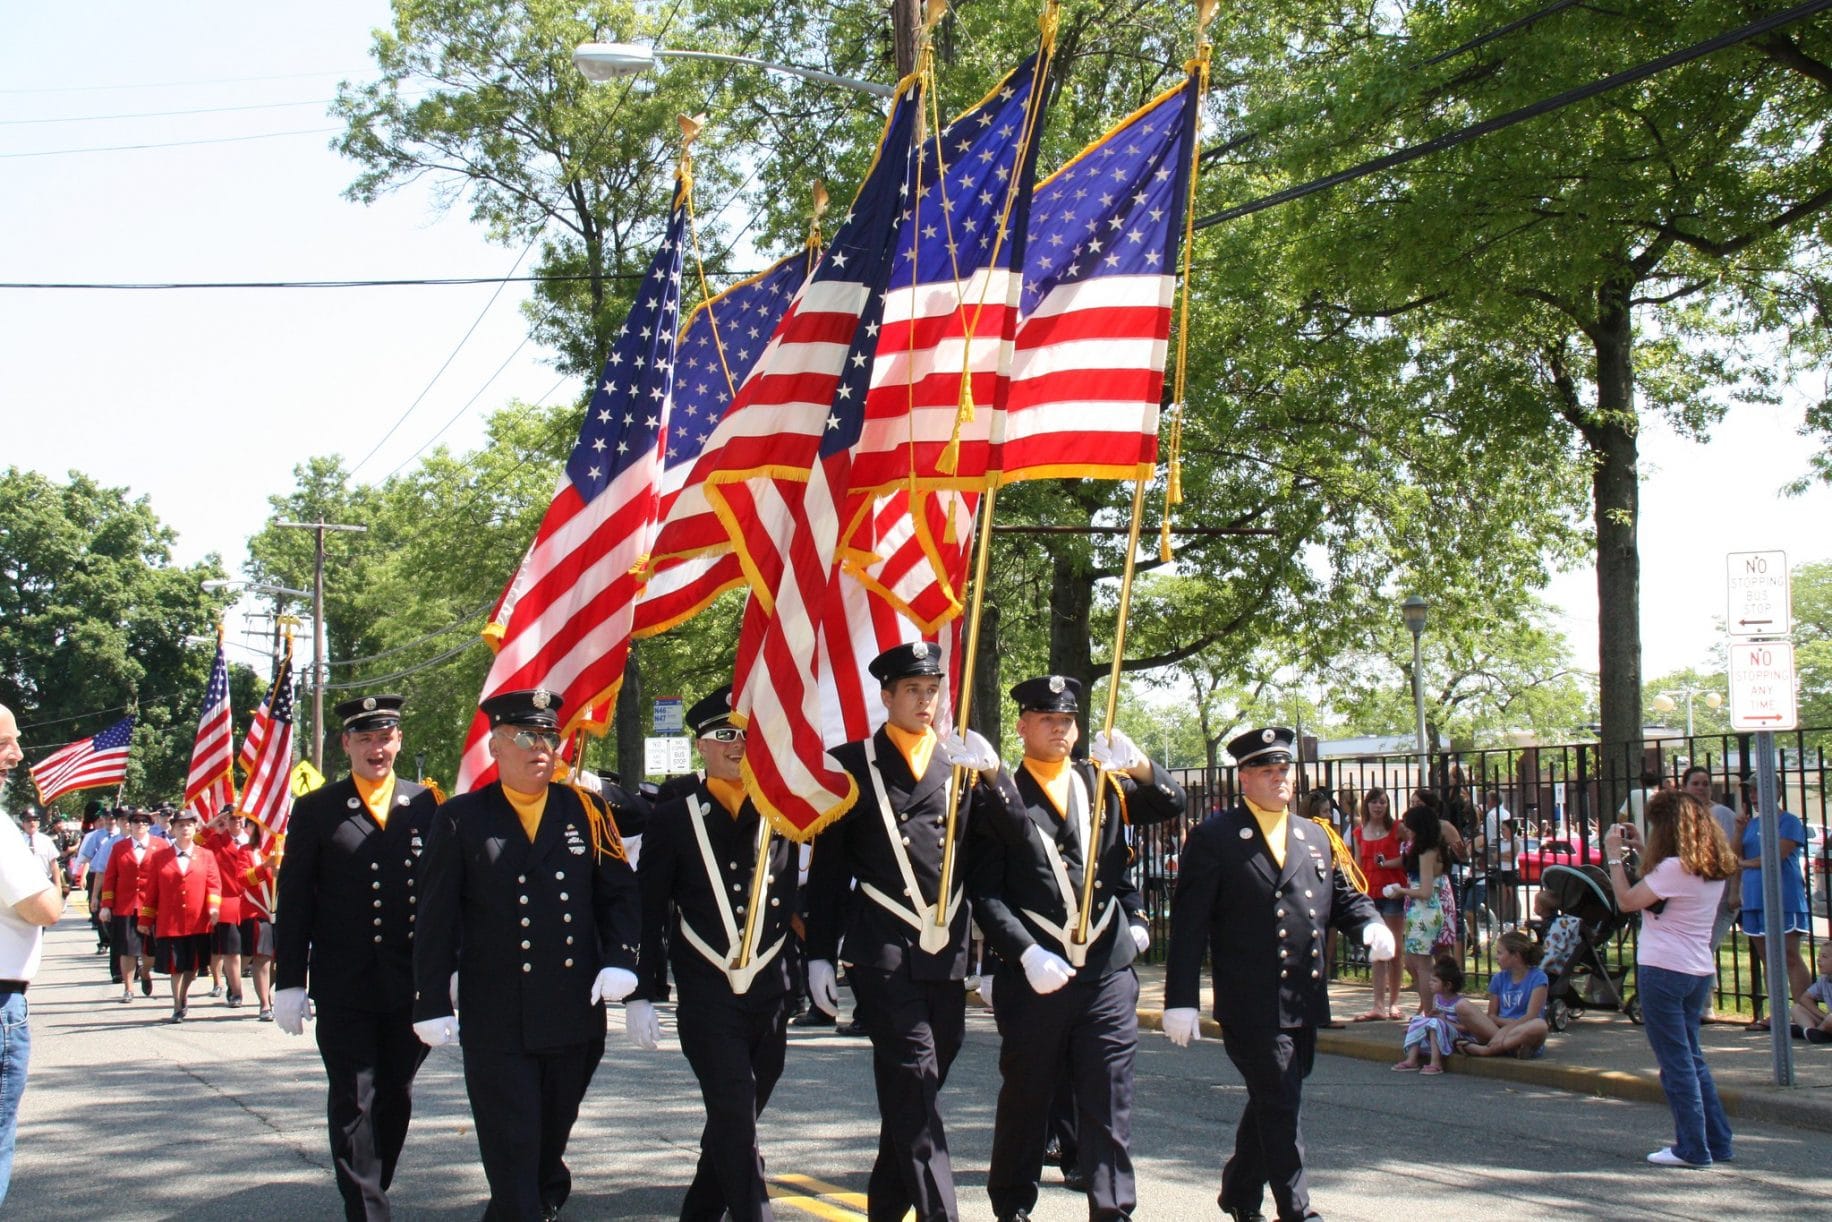 Nation's longest, continuously held Memorial Day Parade will take place